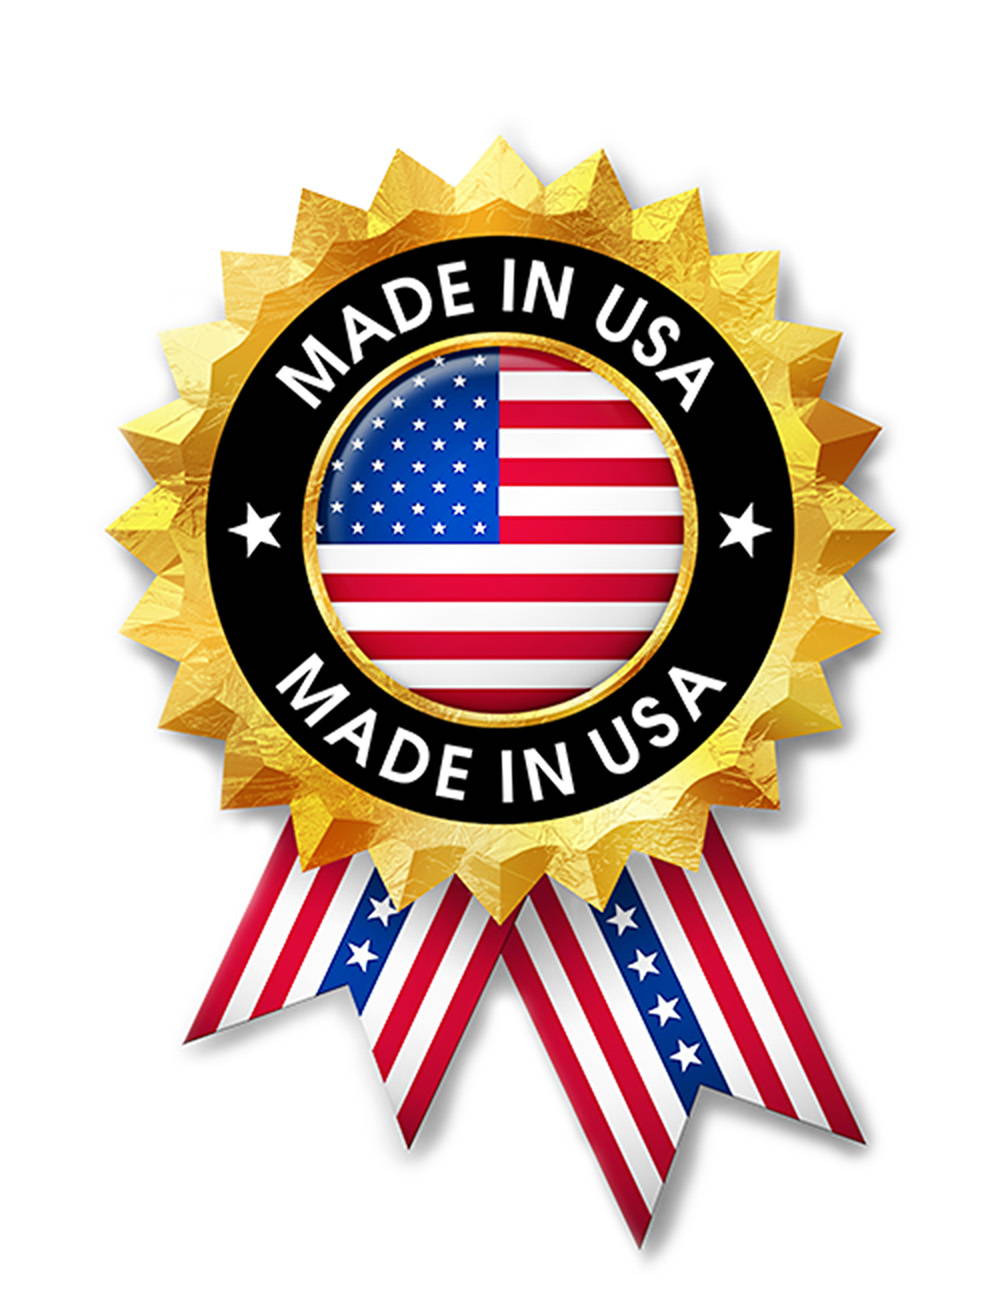 Made in the USA-FromPictoArt